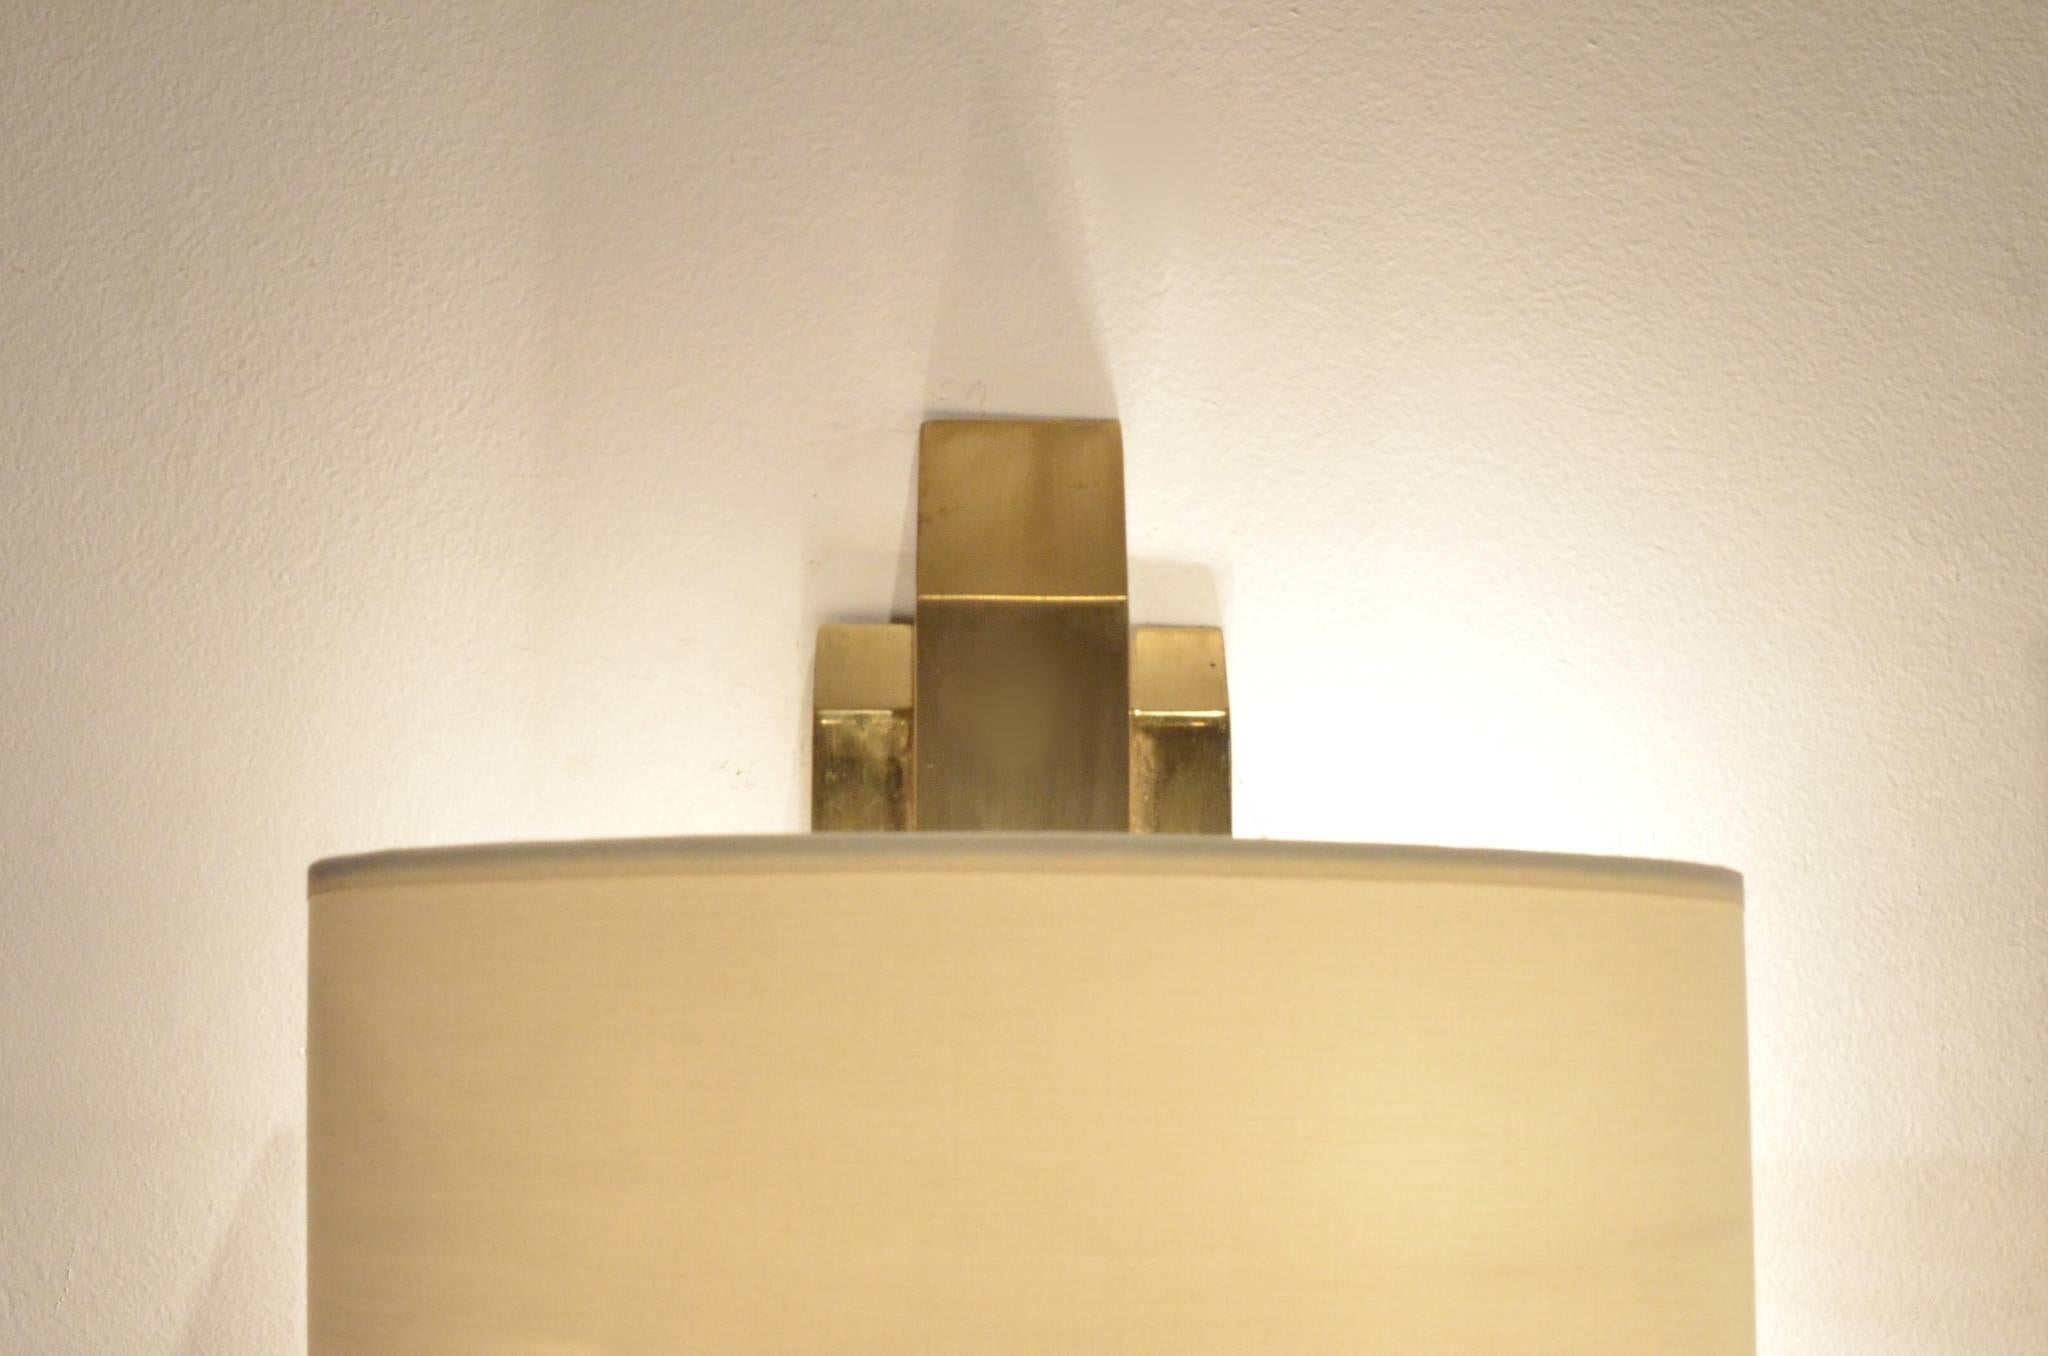 Elegant set of 2x German geometrical full brass structure wall sconces. Vernished and brushed brass elements matched with white textile shades.